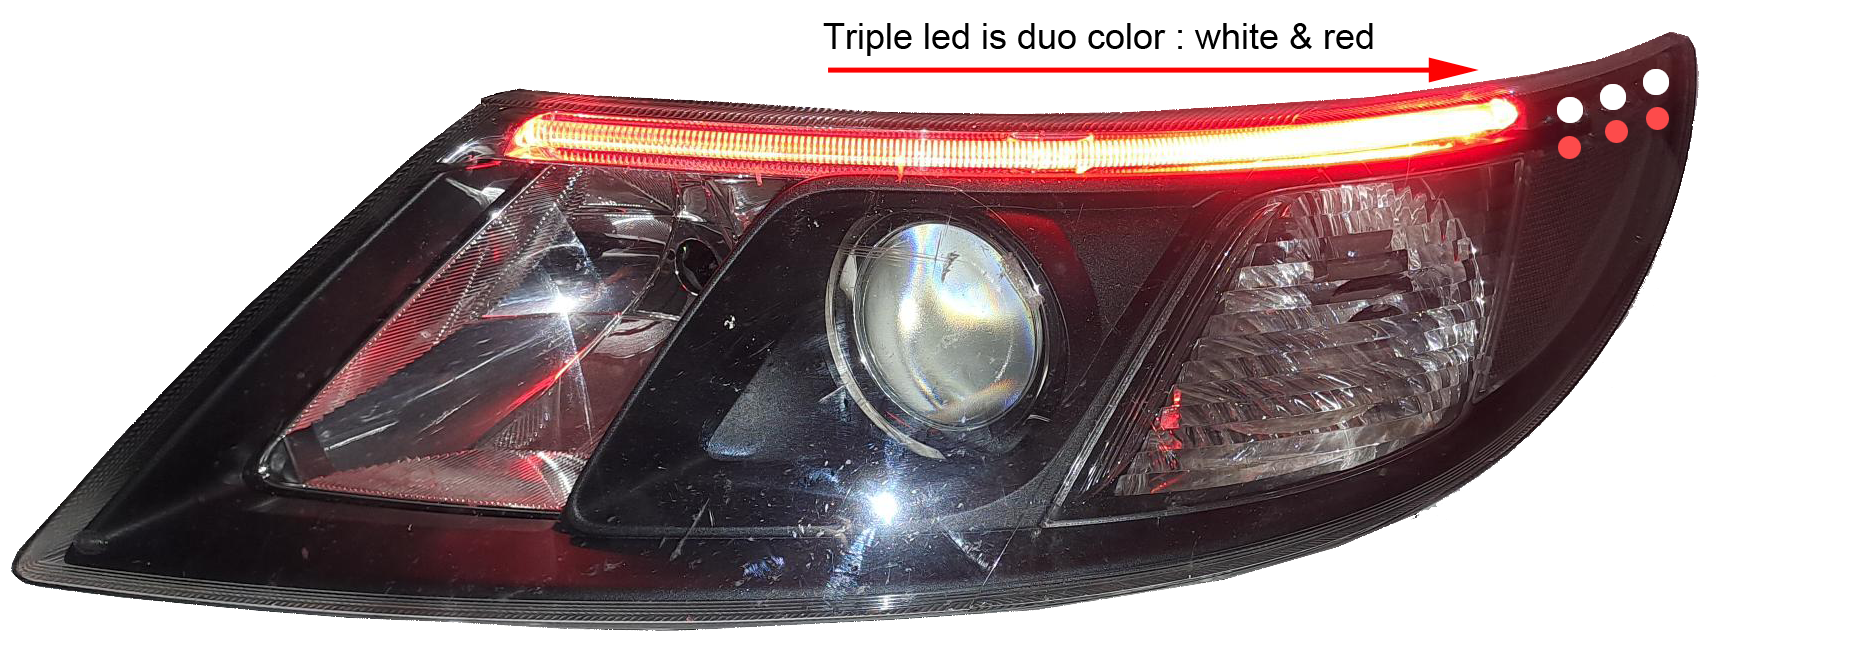 93 - Triple led changes from white to red/orange